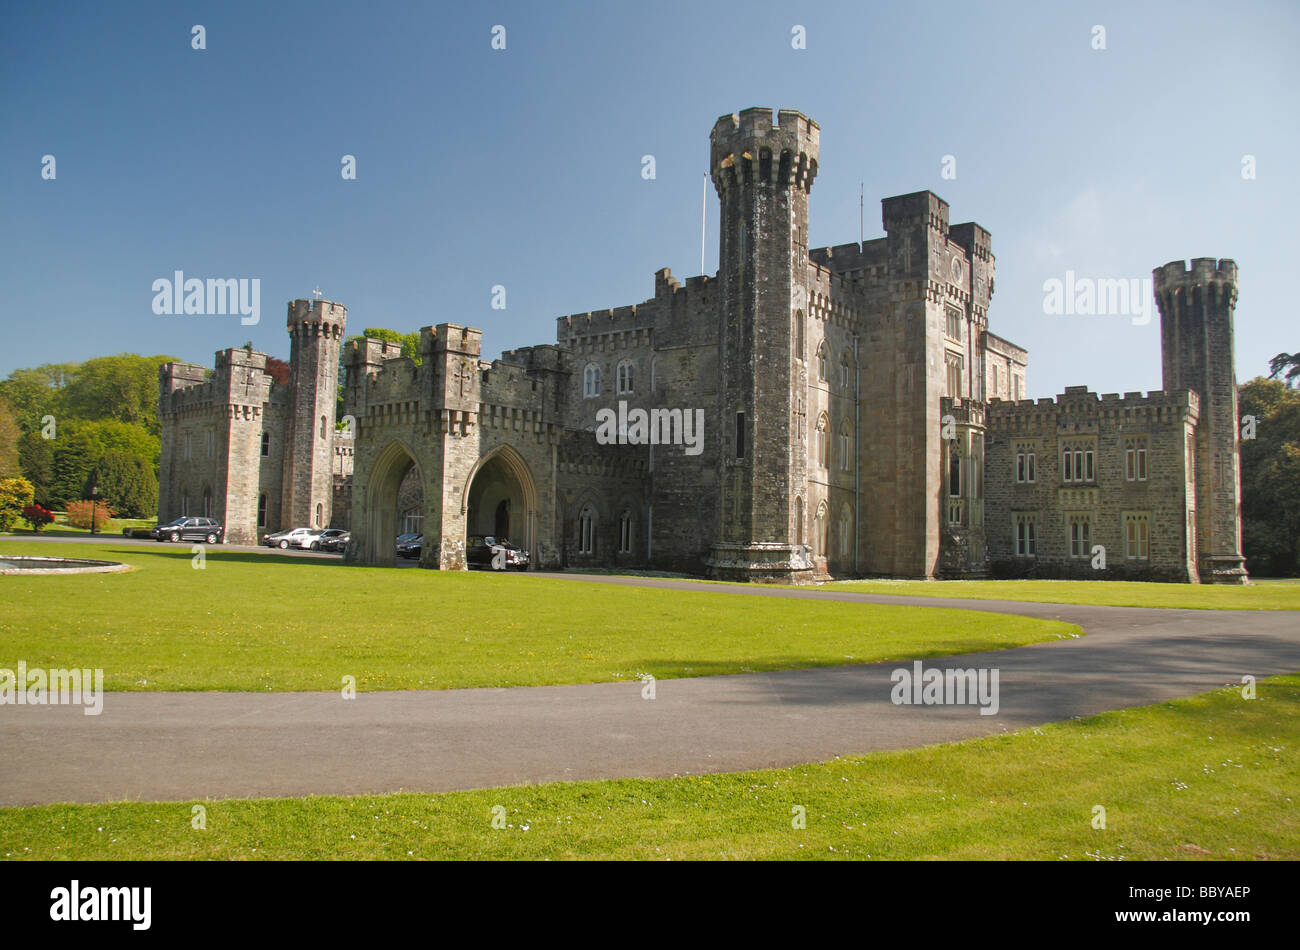 The beautiful grounds, castle & lake of Johnstown Castle, Co. Wexford, Ireland. Stock Photo